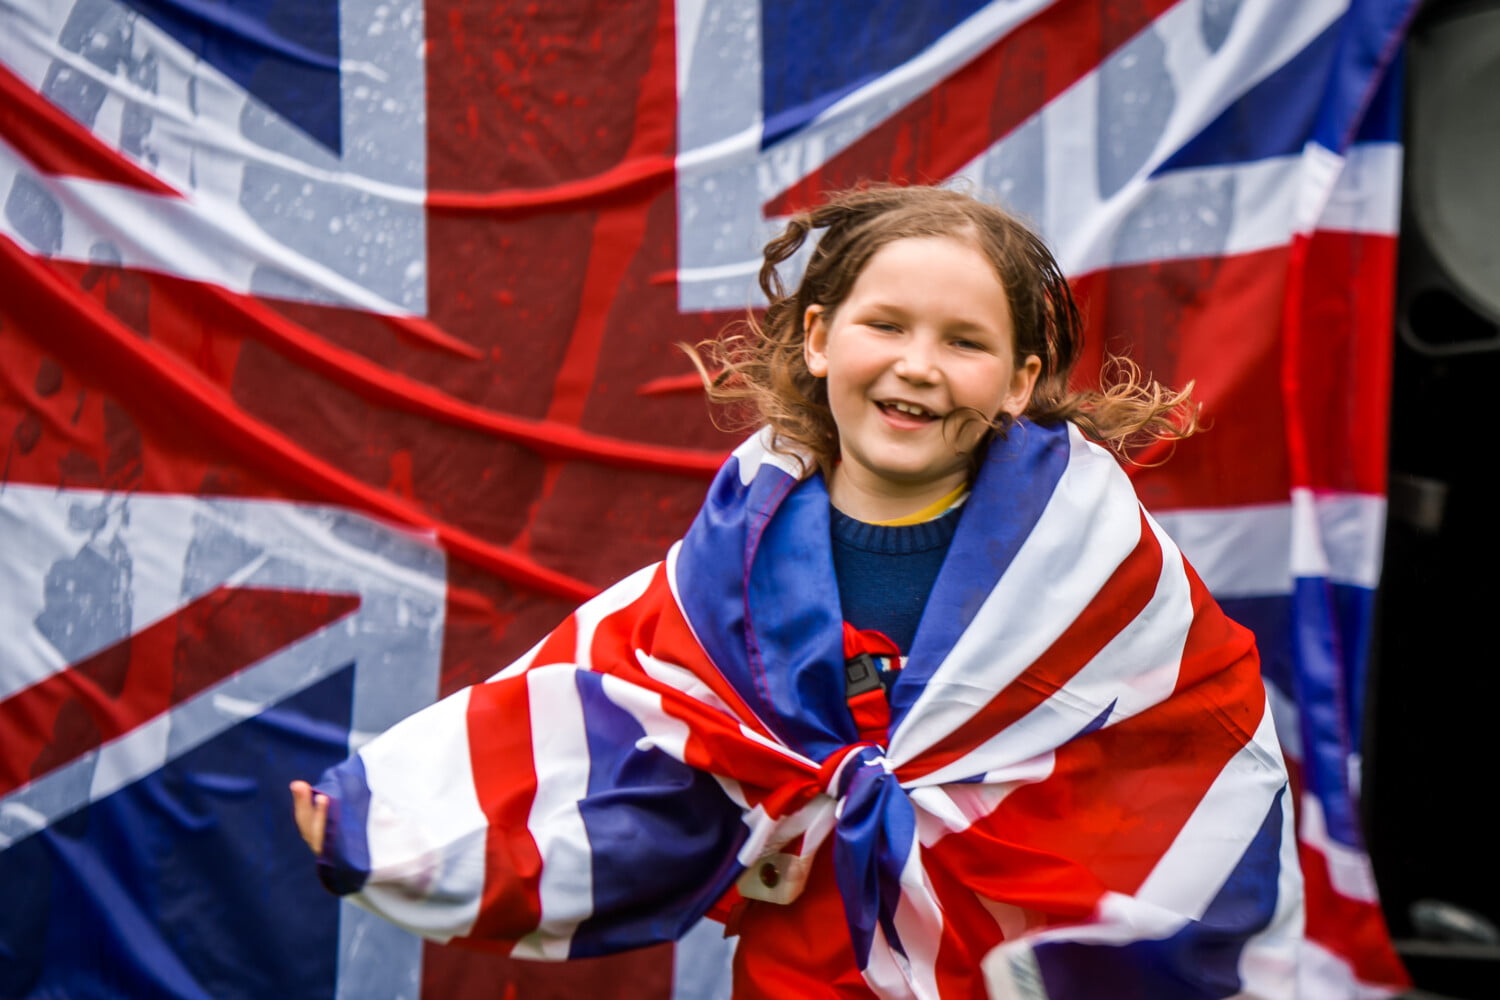 Child with a Union flag draped around her shoulders.